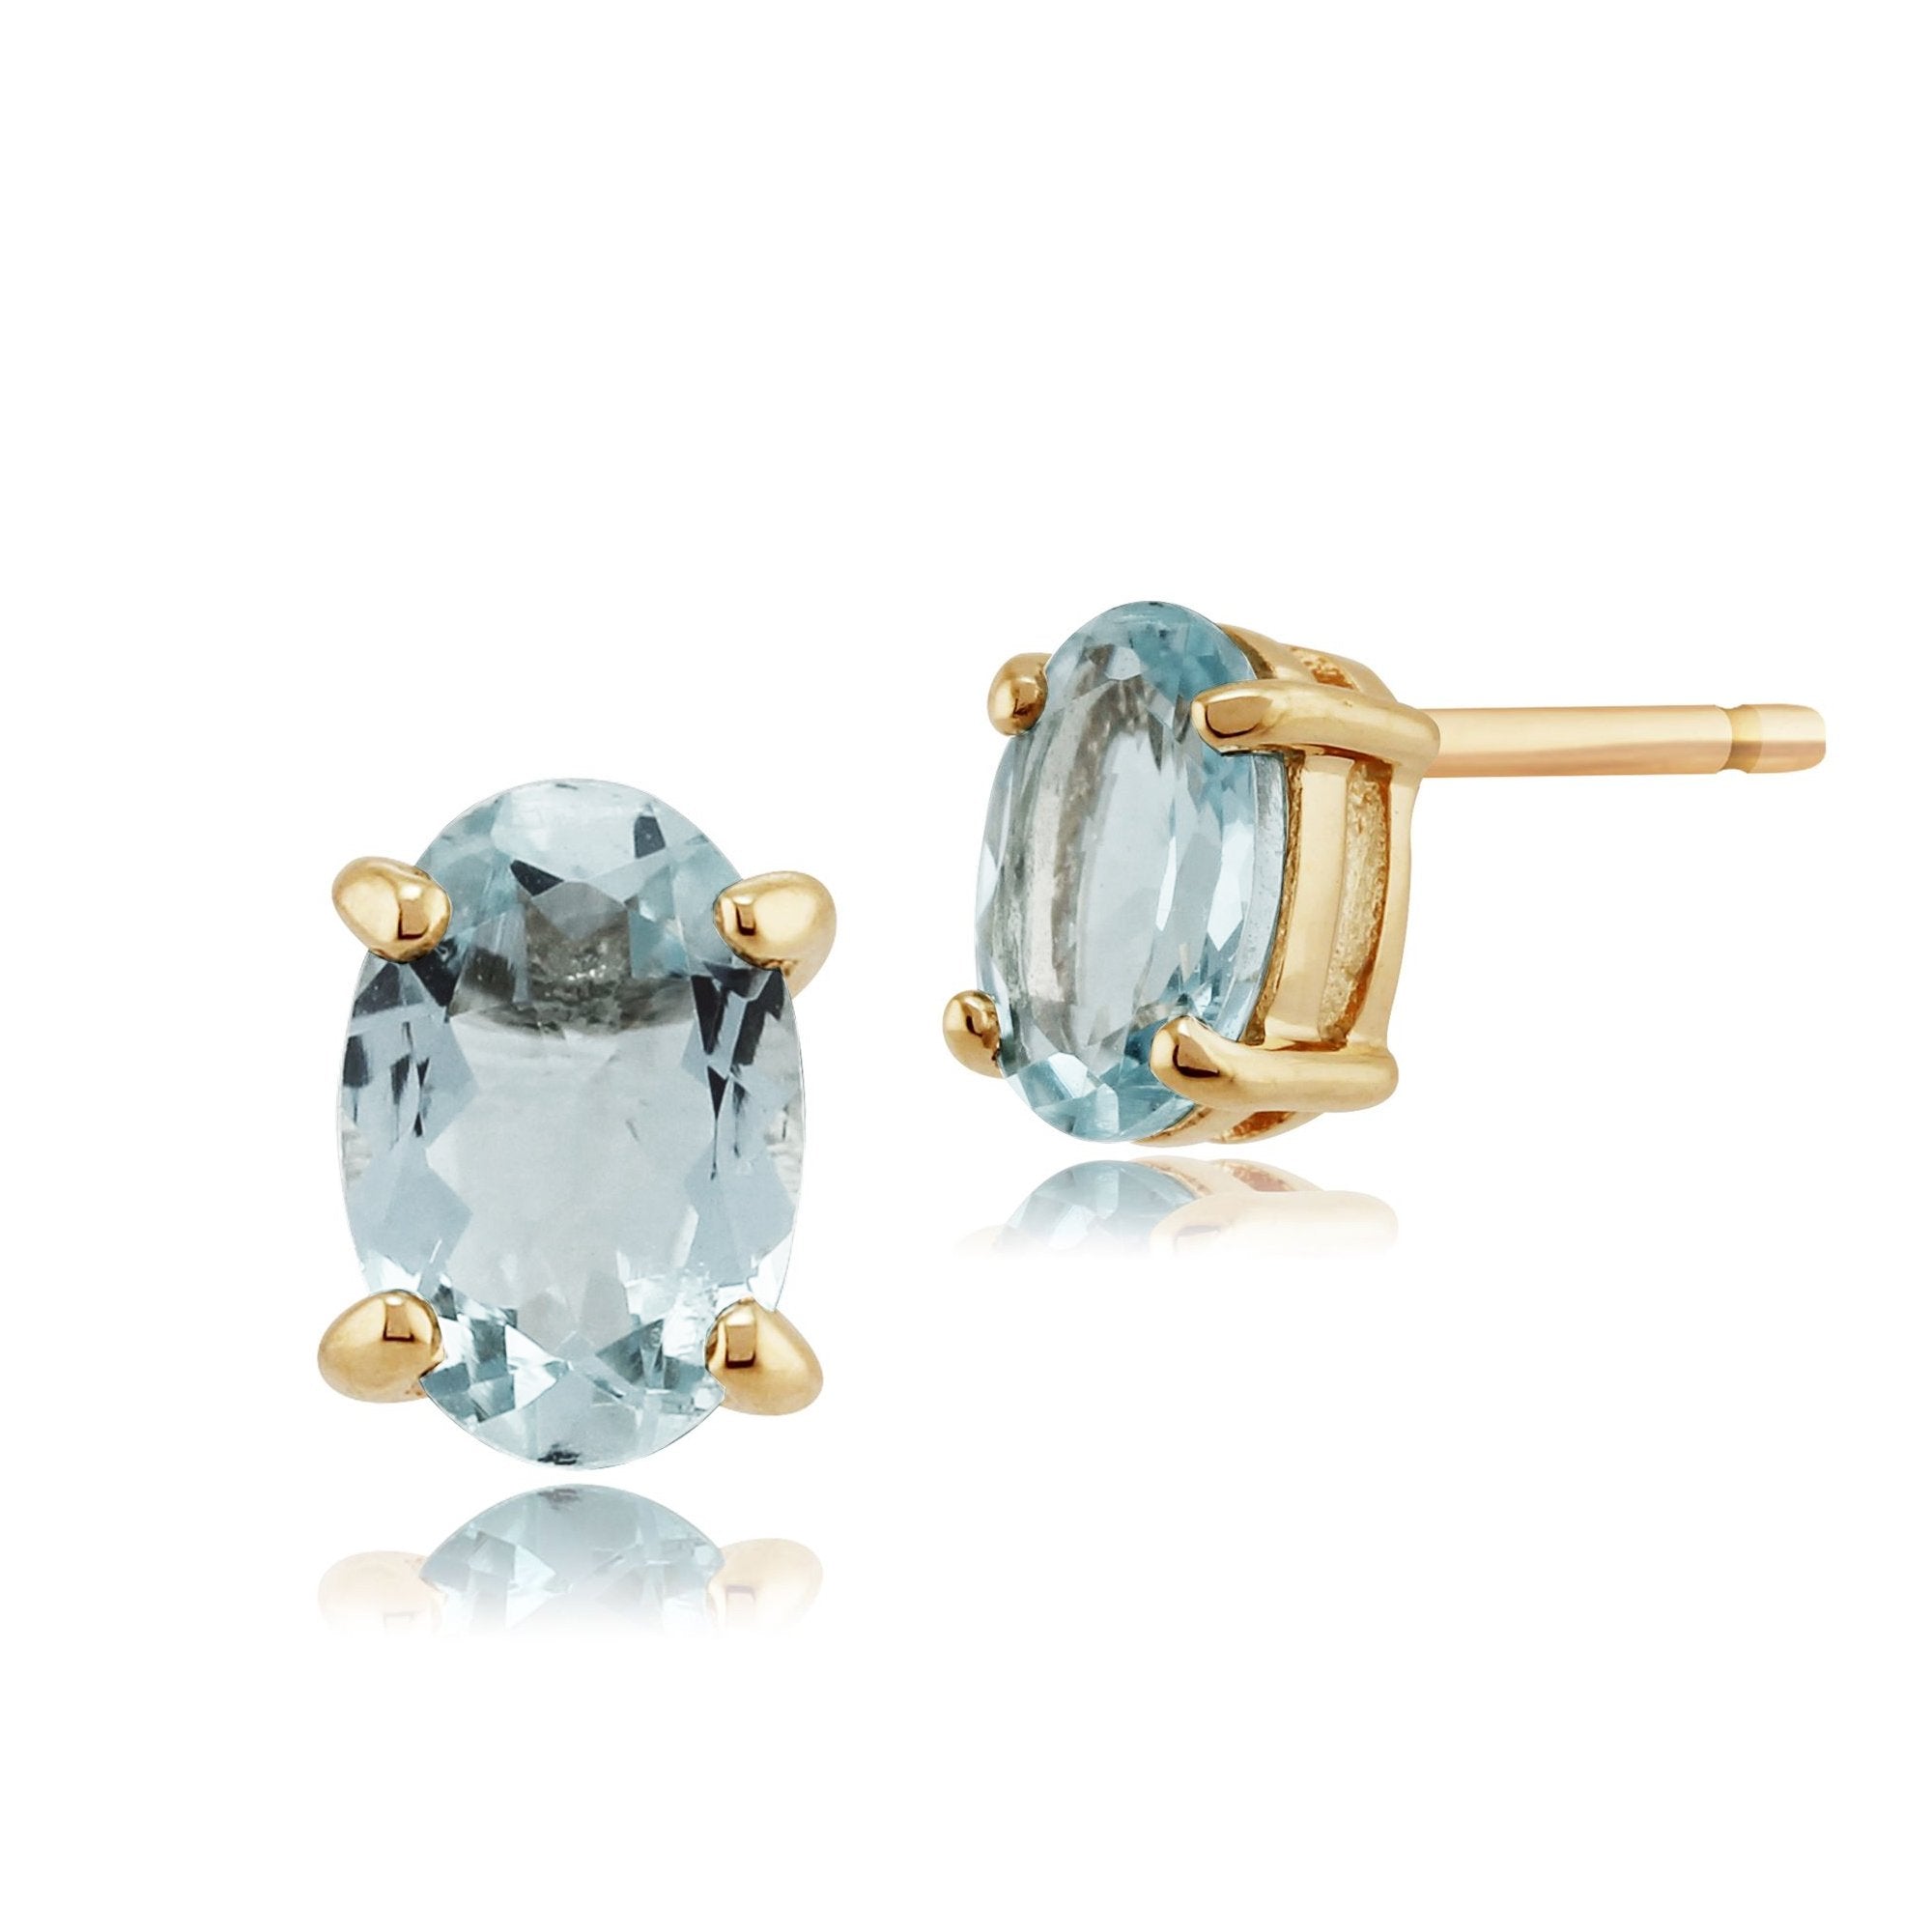 Classic Oval Aquamarine Stud Earrings in 9ct Yellow Gold